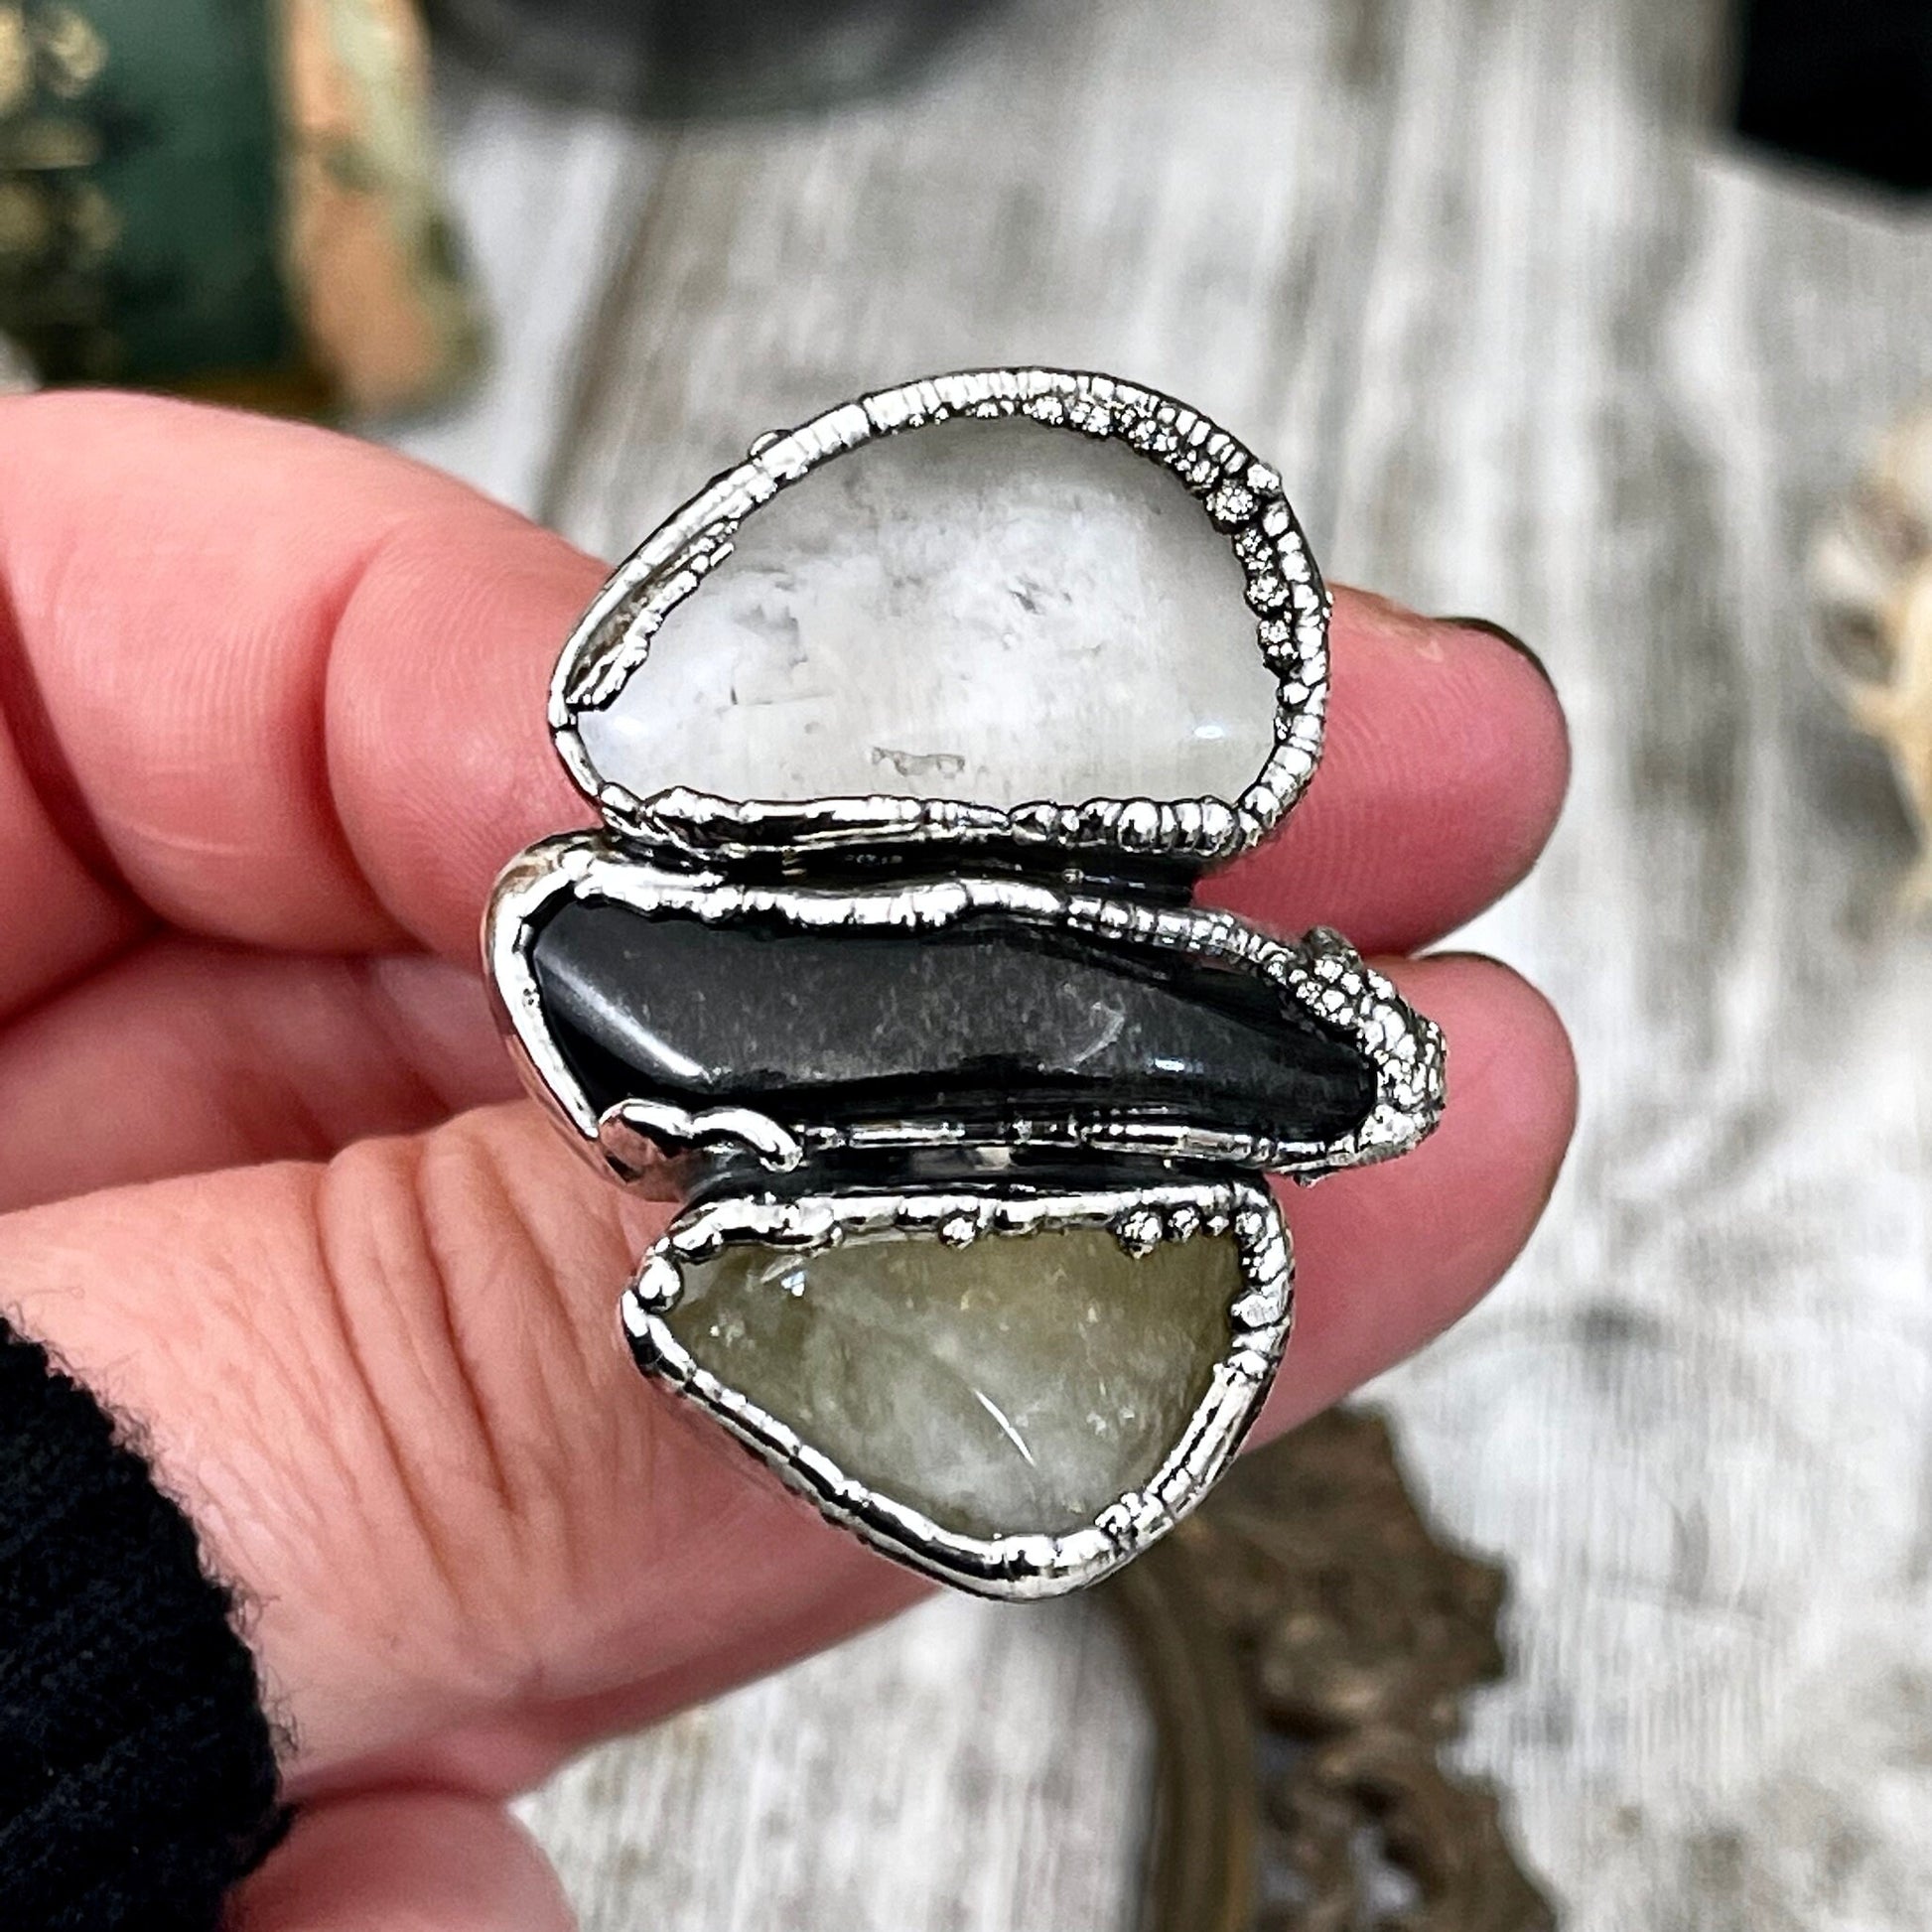 Size 7 Crystal Ring - Three Stone Black Onyx Yellow Citrine & Quartz Silver Ring / Foxlark Collection - One of a Kind / Big Crystal Jewelry